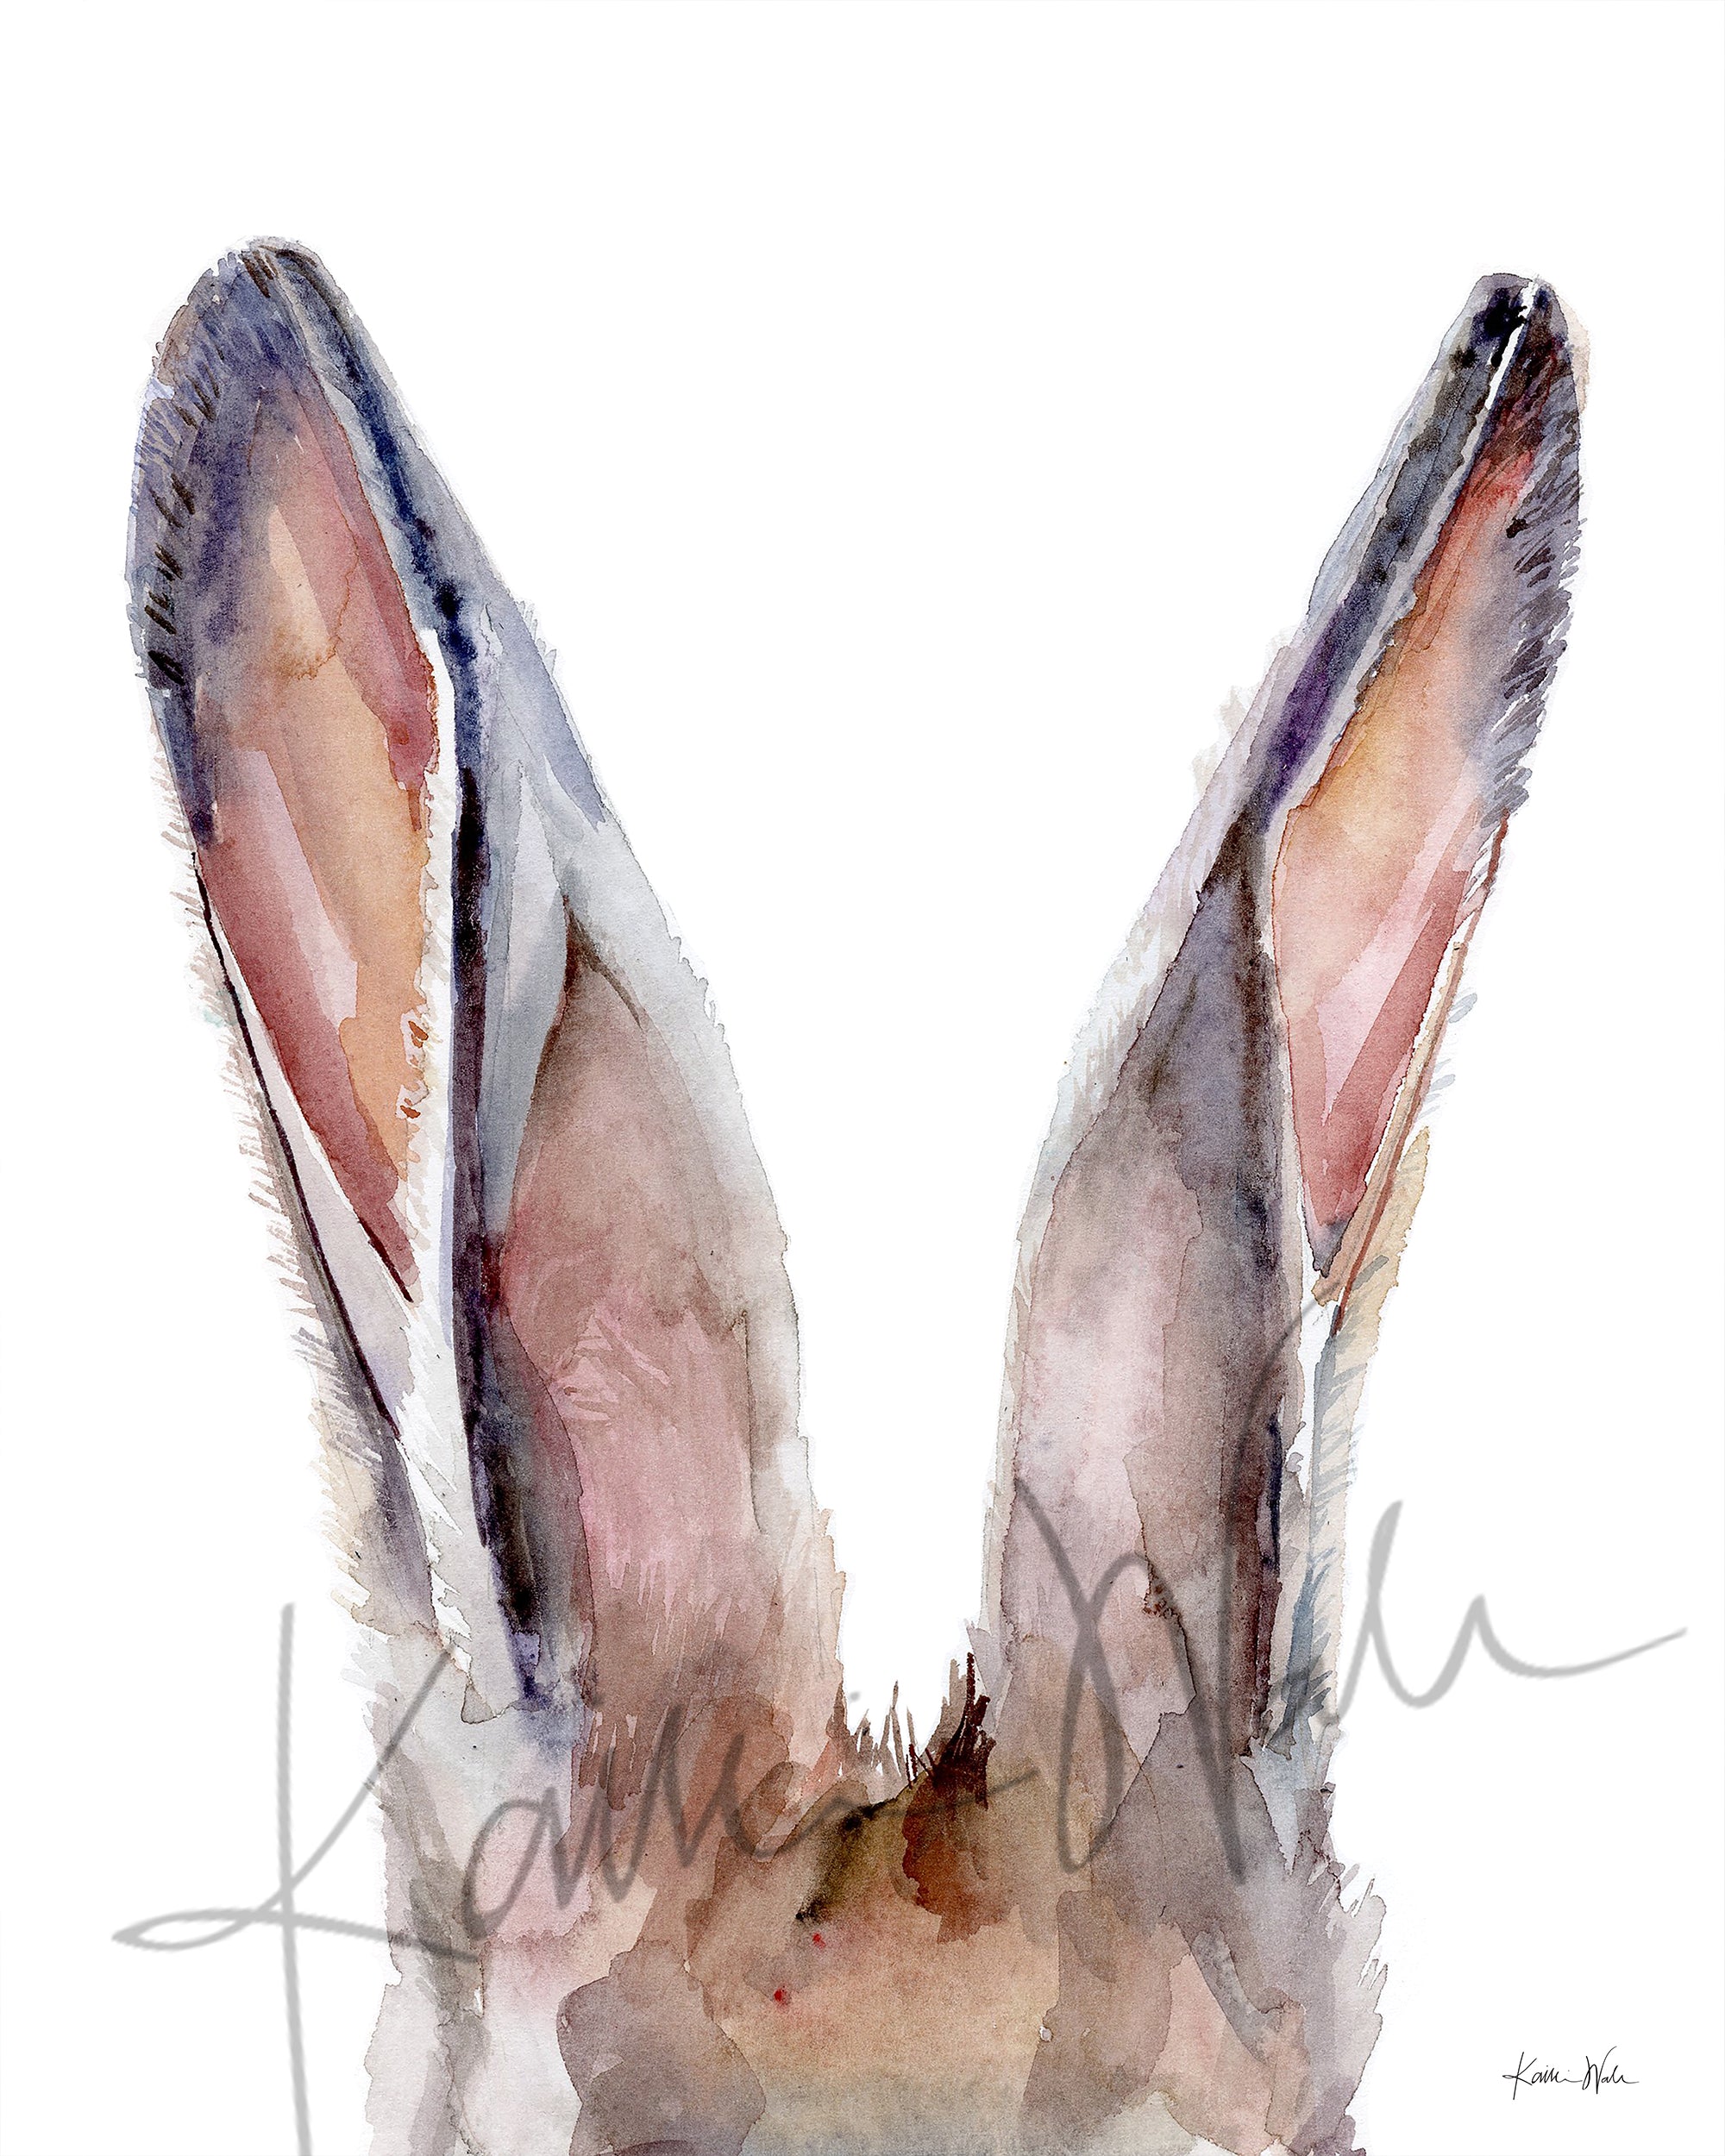 Unframed watercolor painting of a zoomed in perspective of rabbit ears in tans, pinks, and browns.